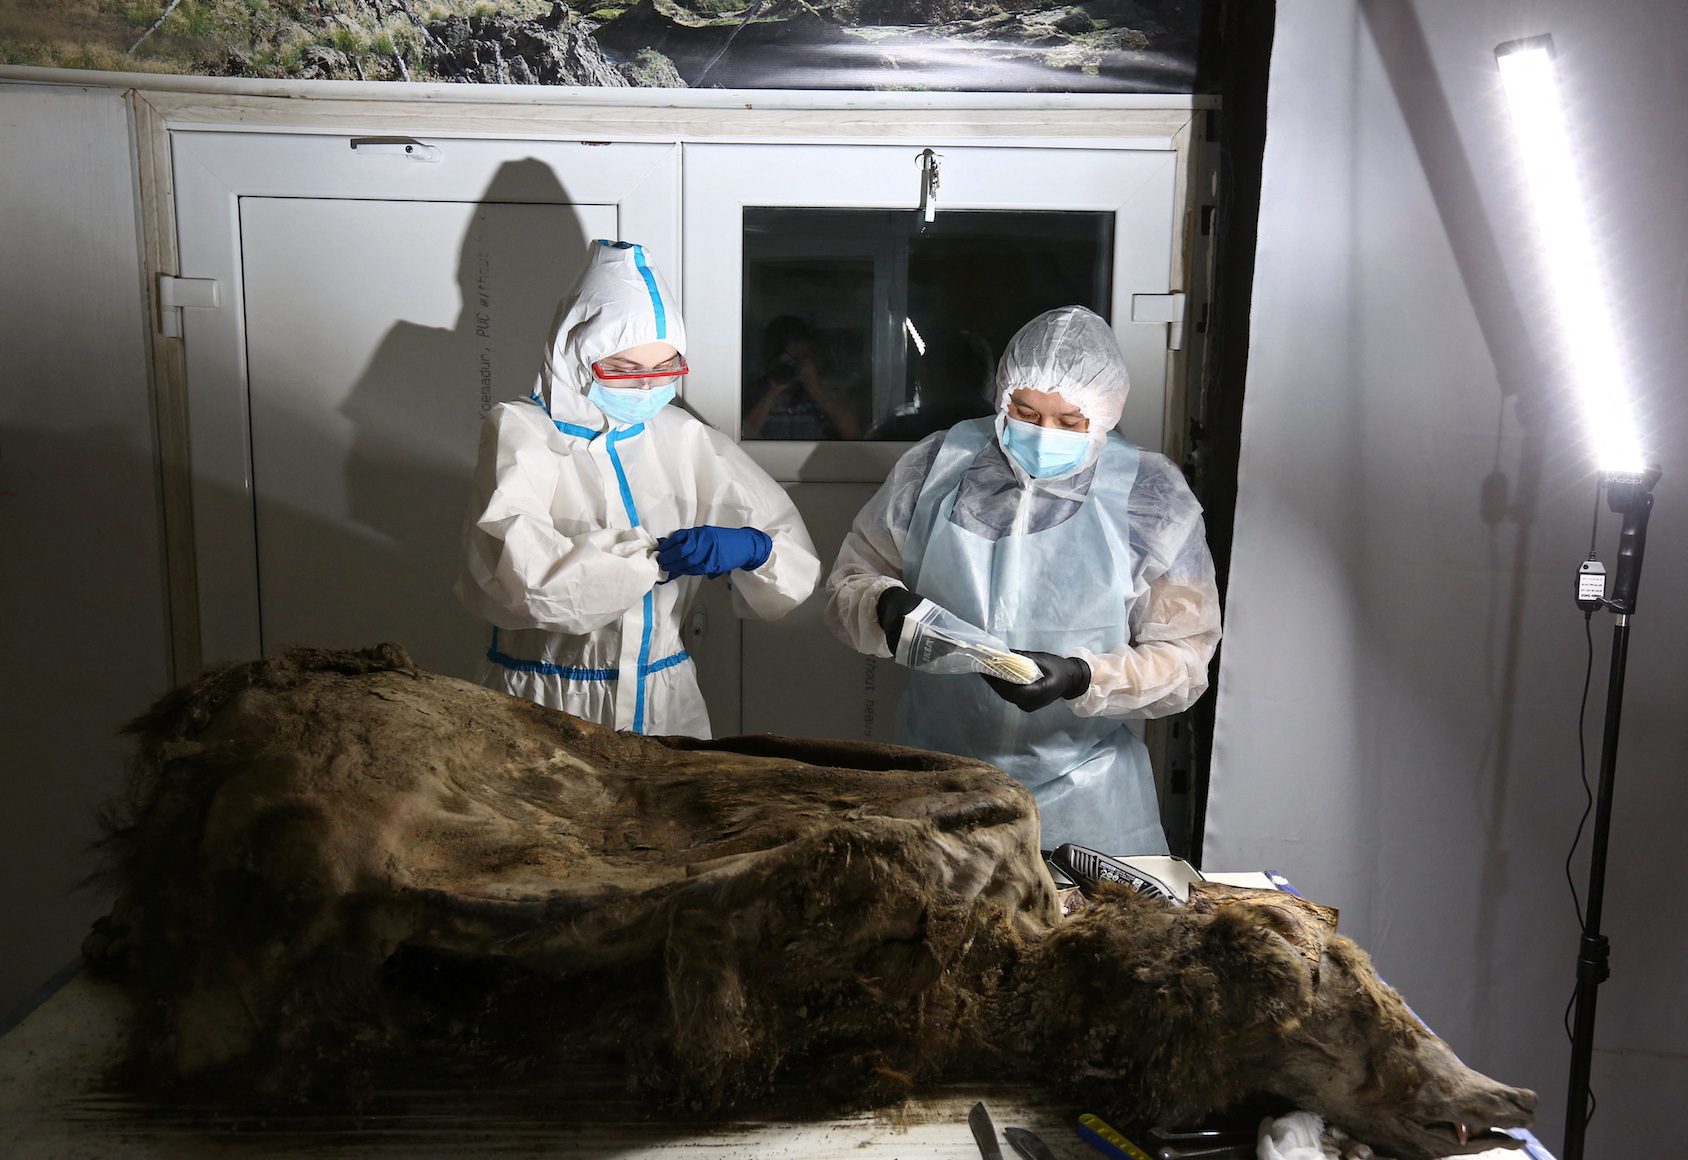 Scientists dissect 3,500-year-old bear discovered in Siberian permafrost